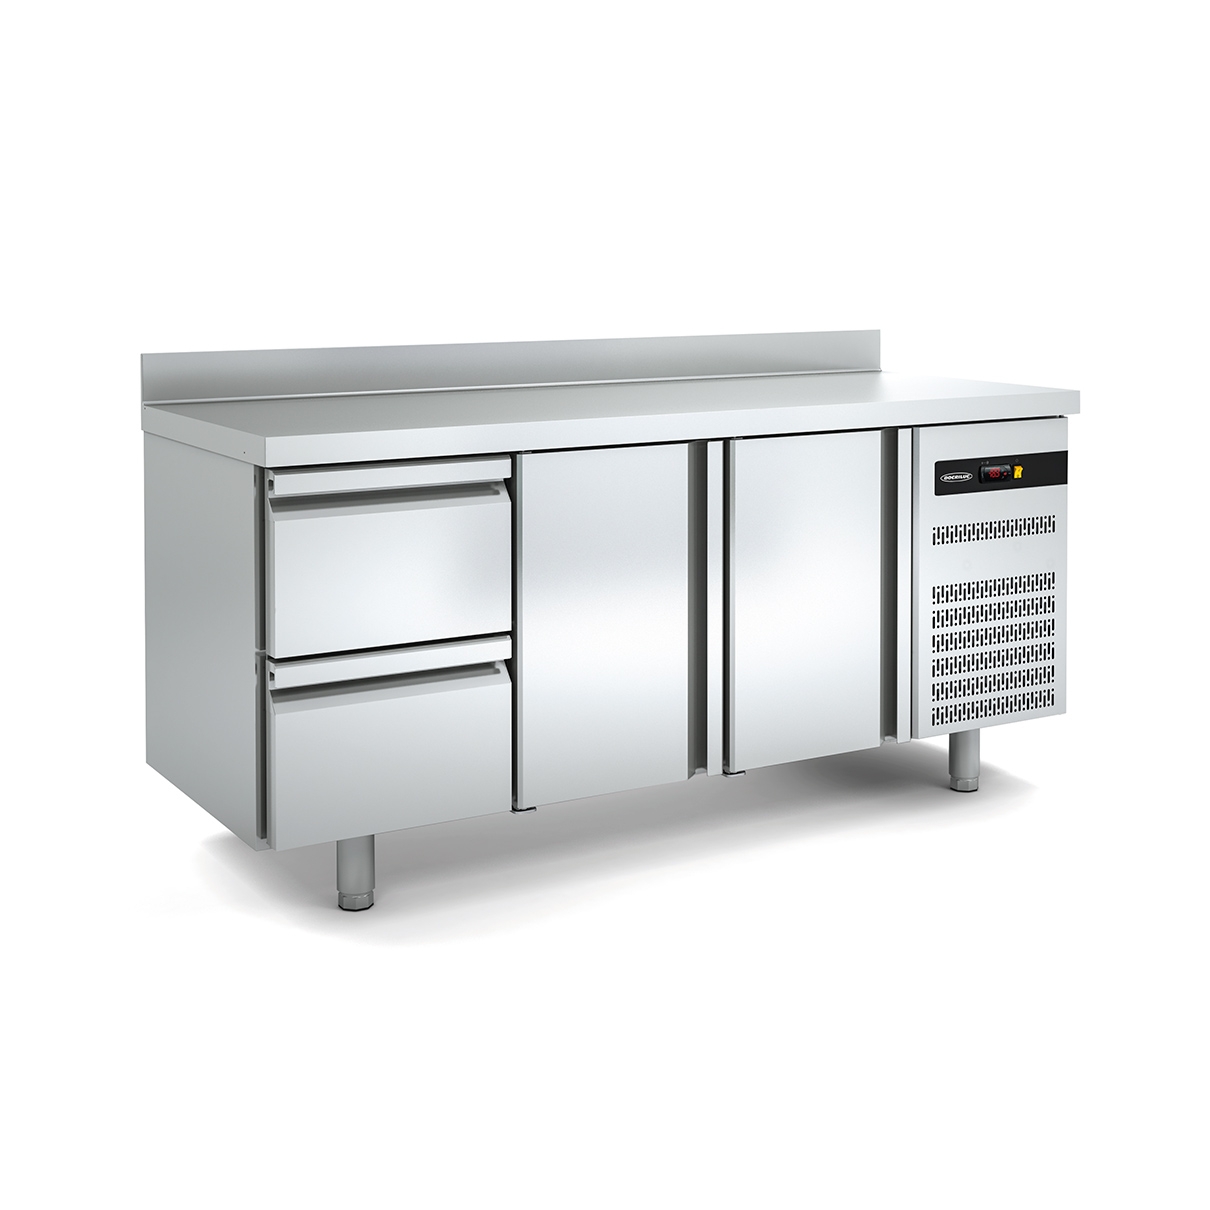 SNACK Refrigerated Counter MGD-C